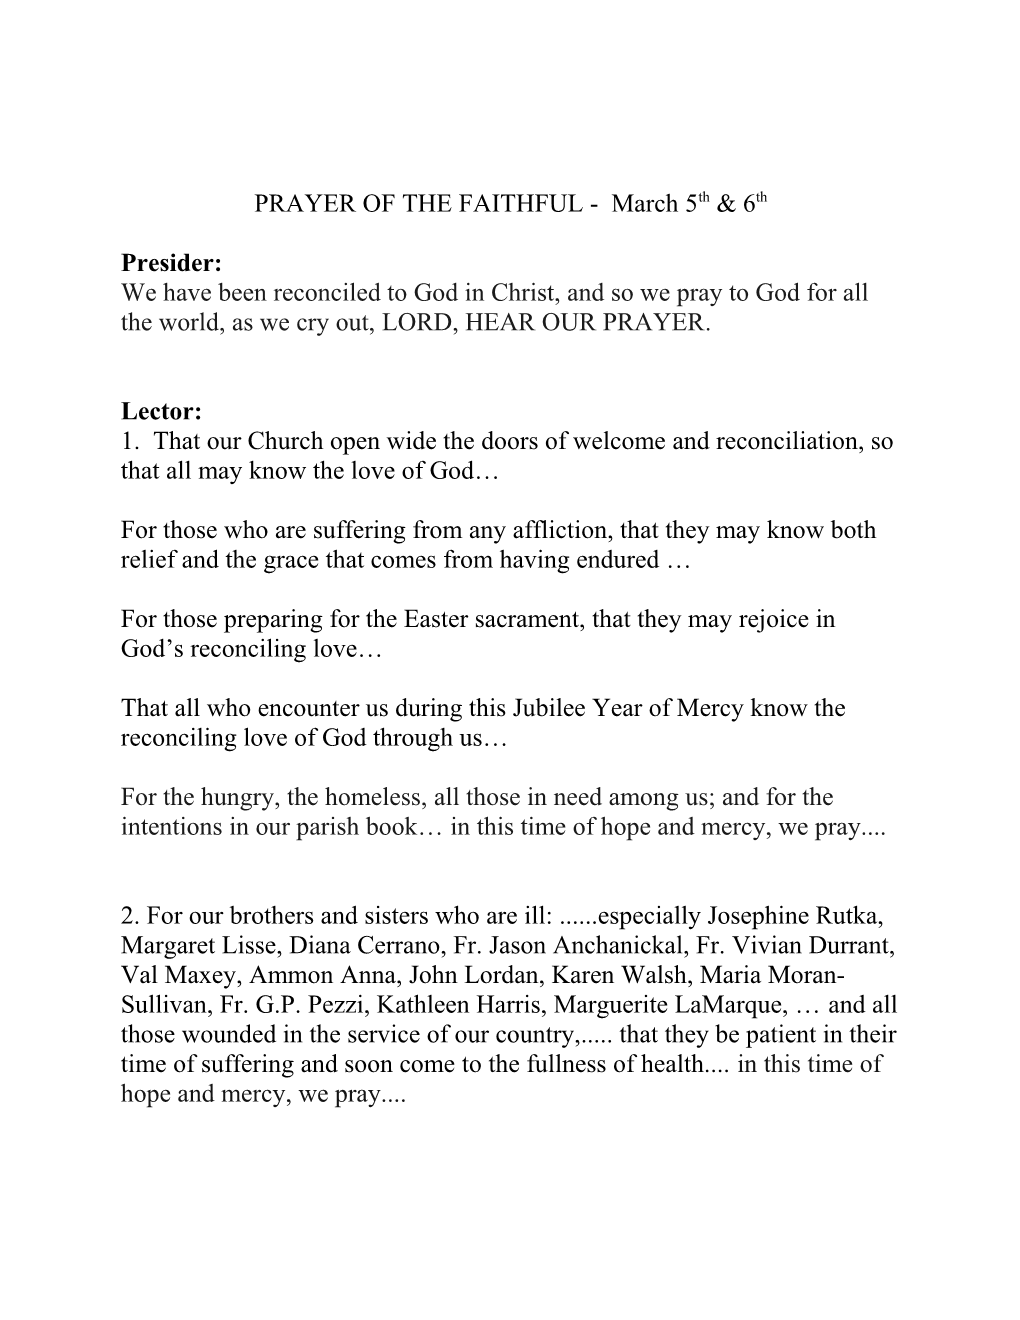 PRAYER of the FAITHFUL - March 5Th & 6Th